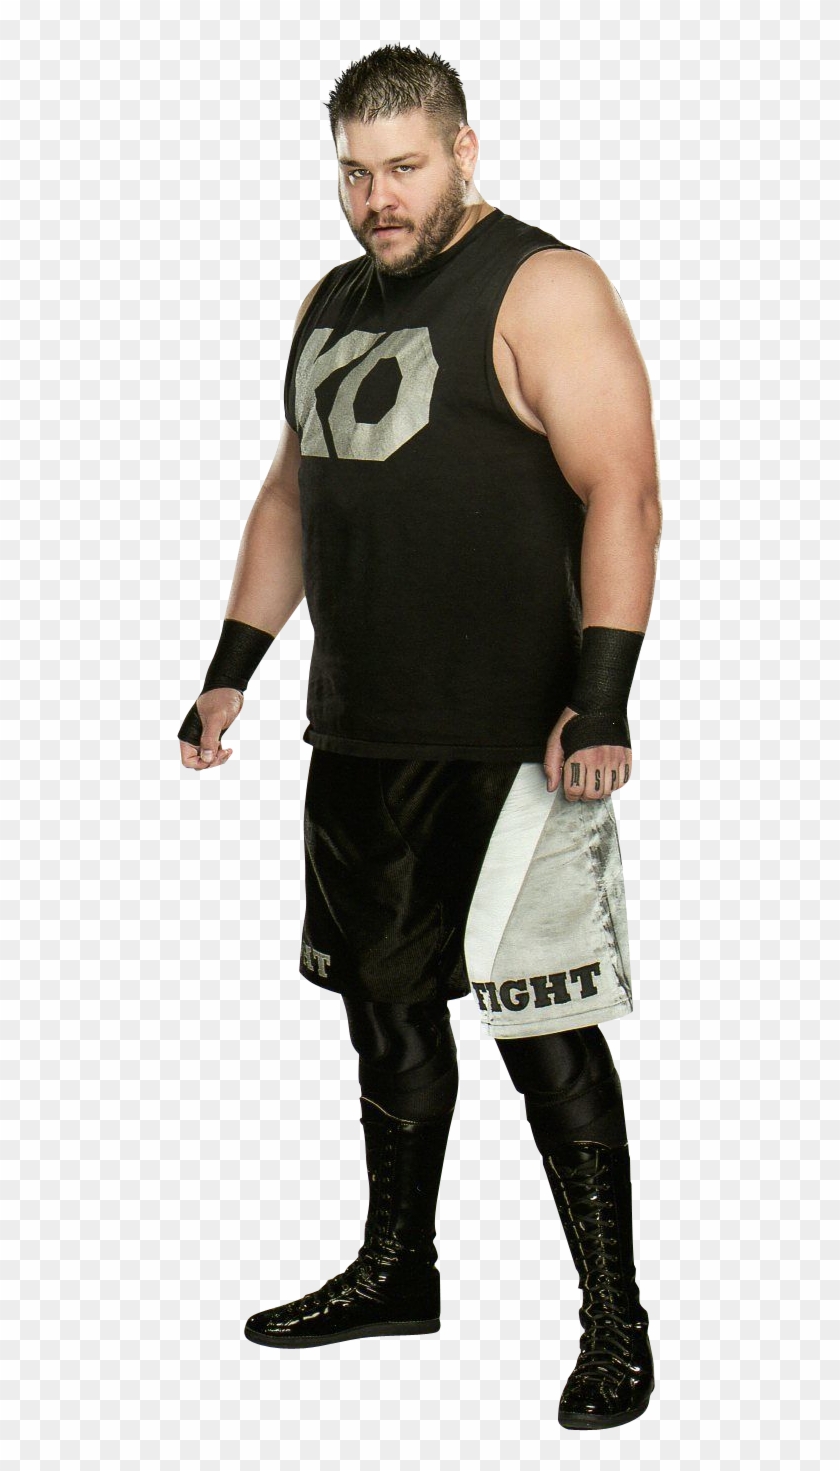 Kevin Owens Png Transparent Image - Kevin Owens With United States Champion Png Clipart #194939